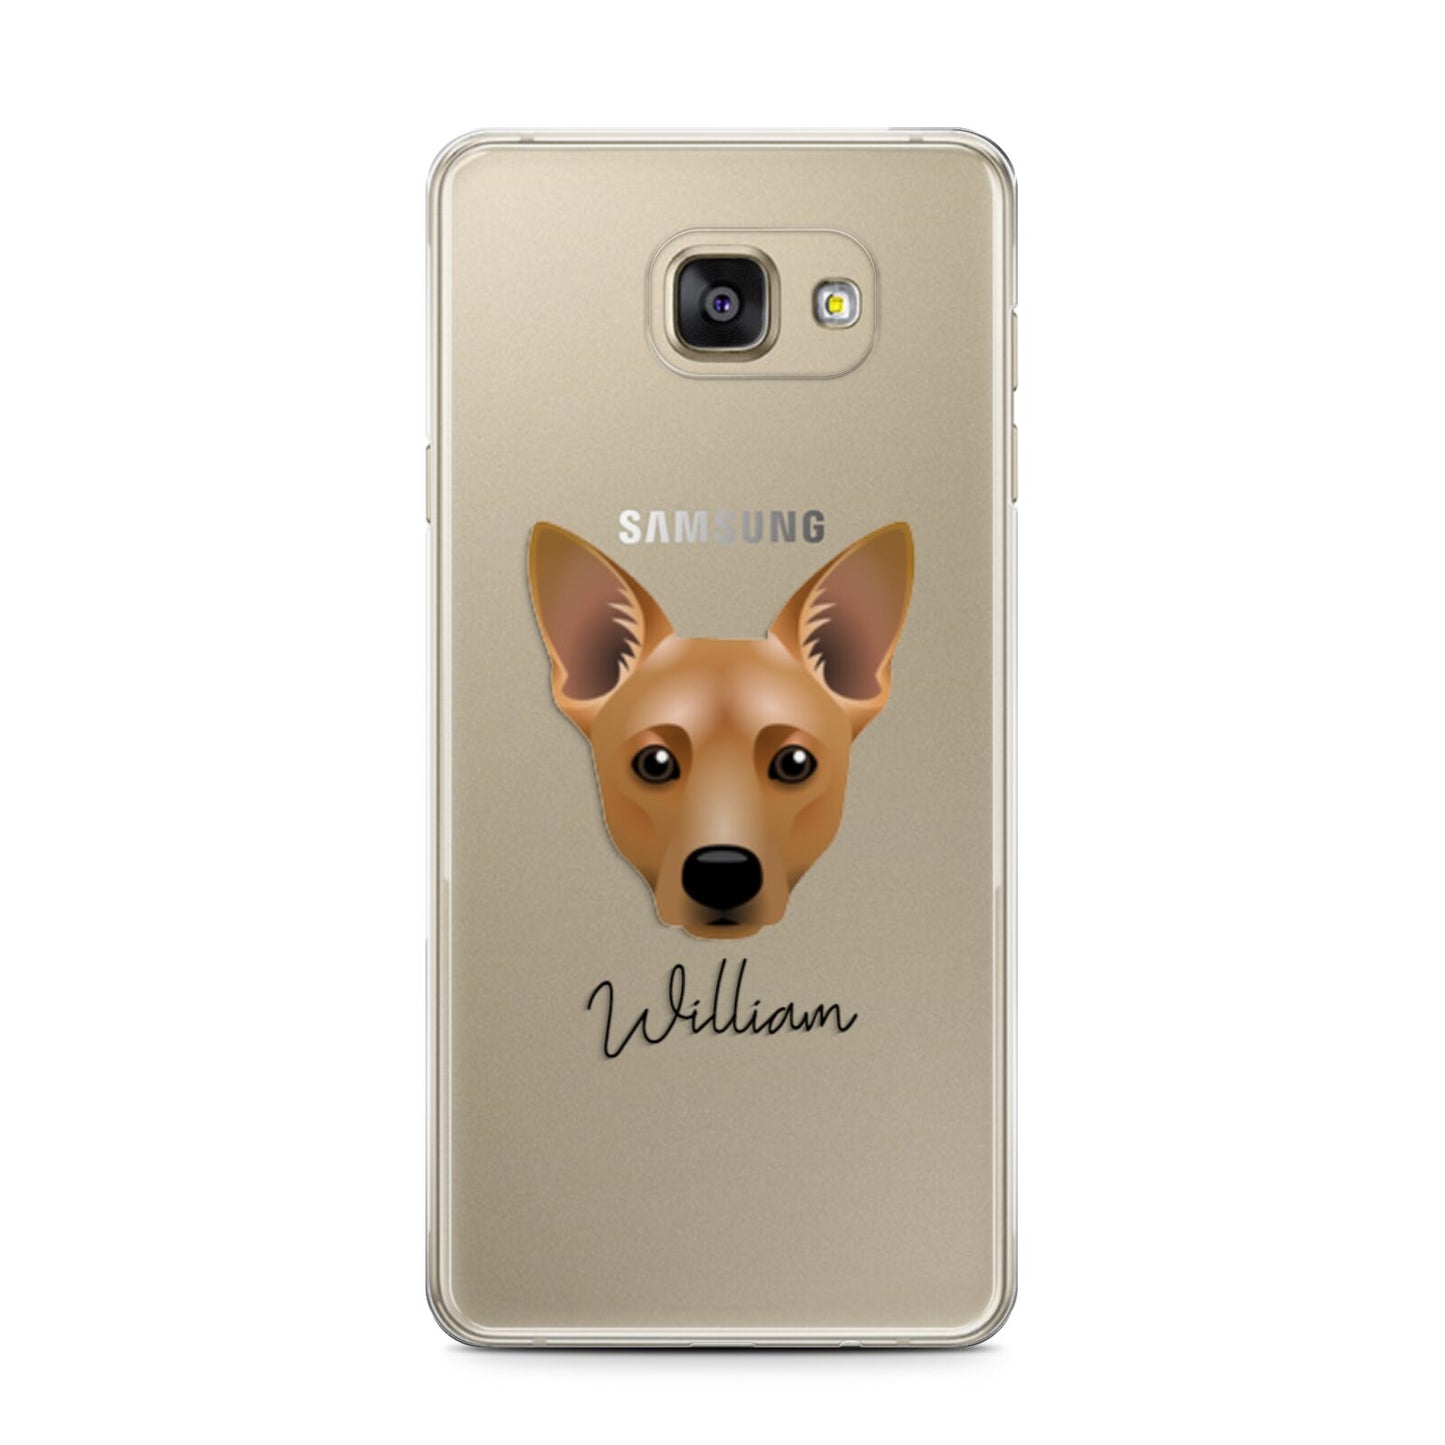 Cojack Personalised Samsung Galaxy A7 2016 Case on gold phone